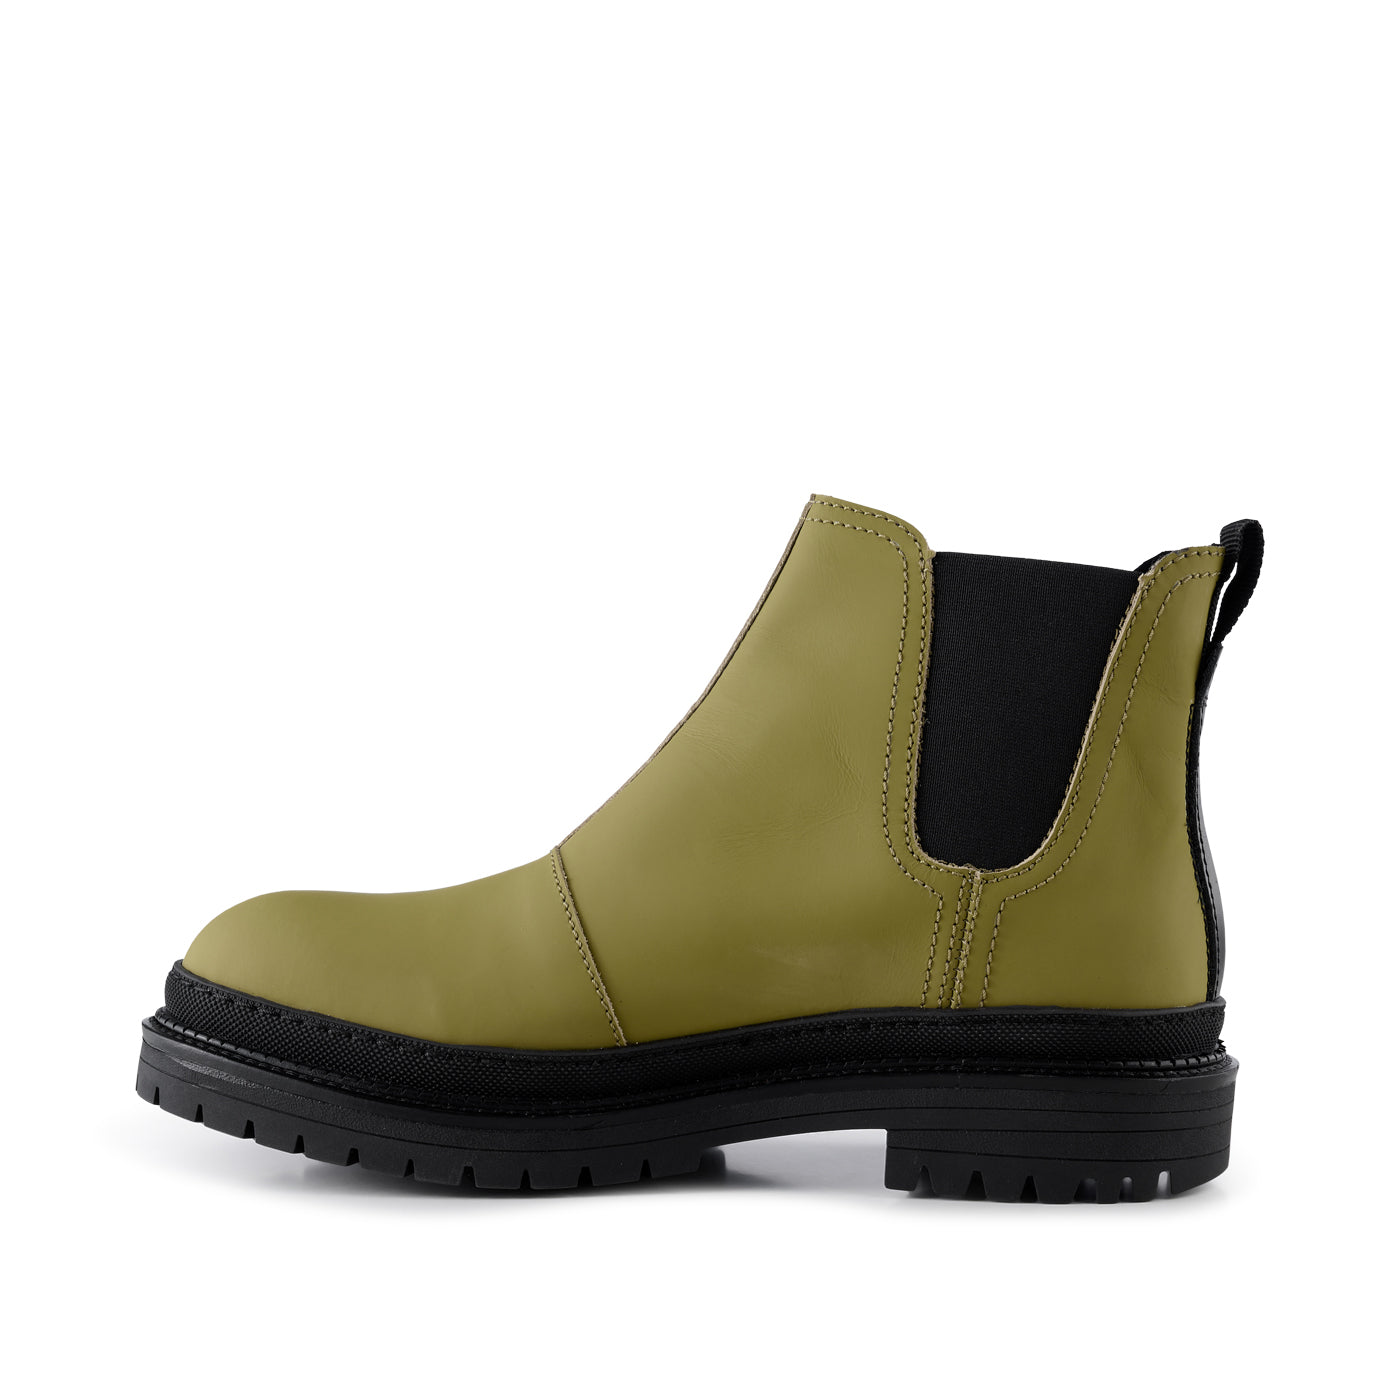 SHOE THE BEAR MENS Arvid chelsea boot leather Chelsea Boots 155 KHAKI GREEN